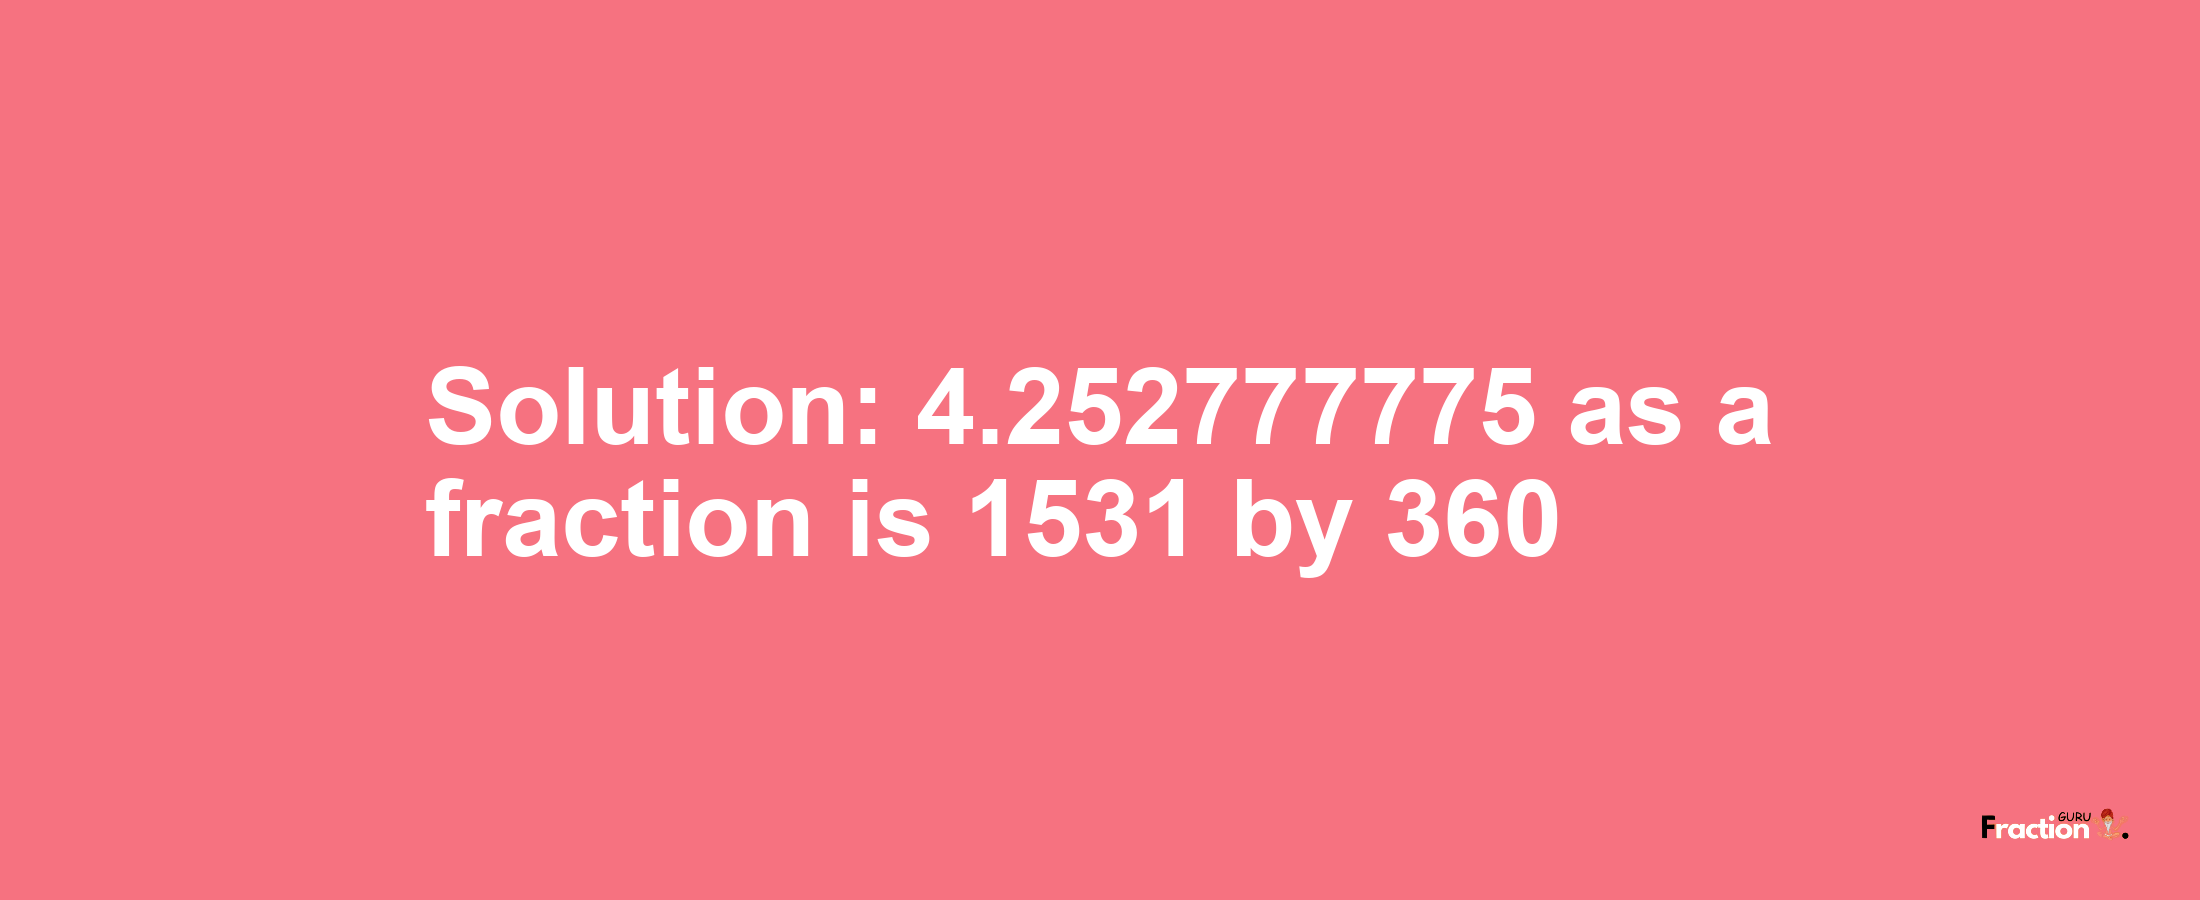 Solution:4.252777775 as a fraction is 1531/360